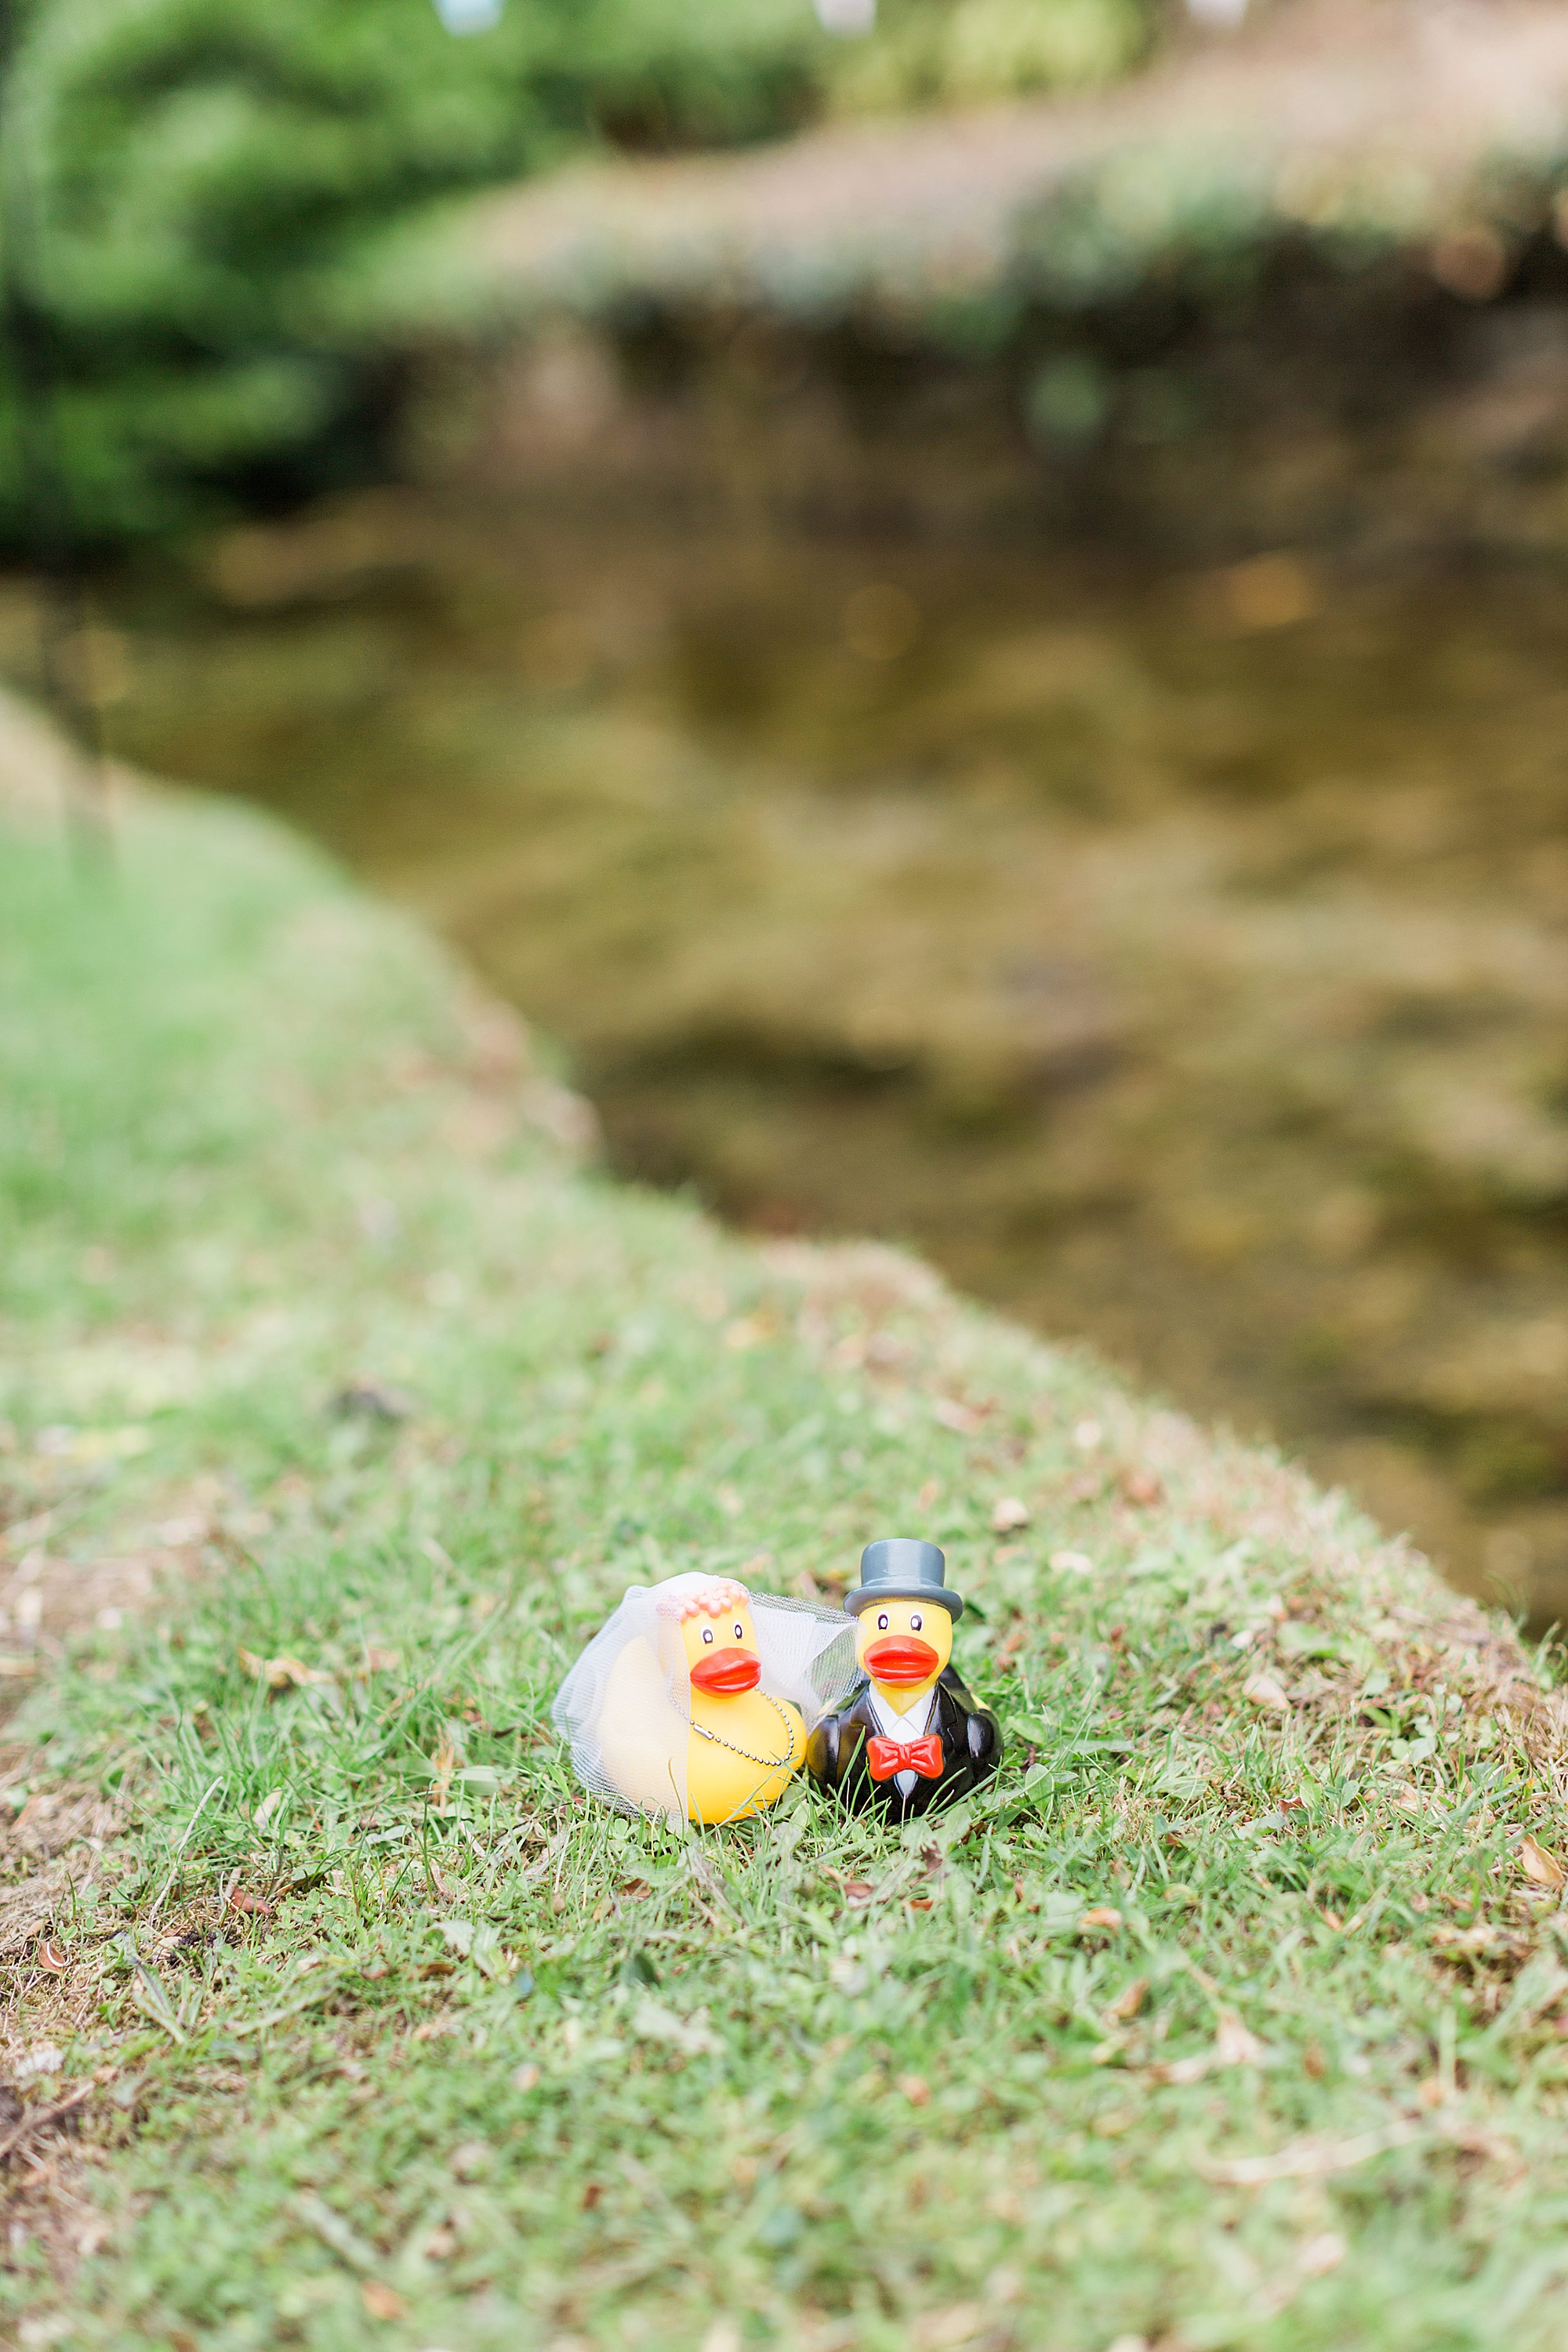 Image shows a bride and groom themed rubber duck positioned on the bank next to a stream